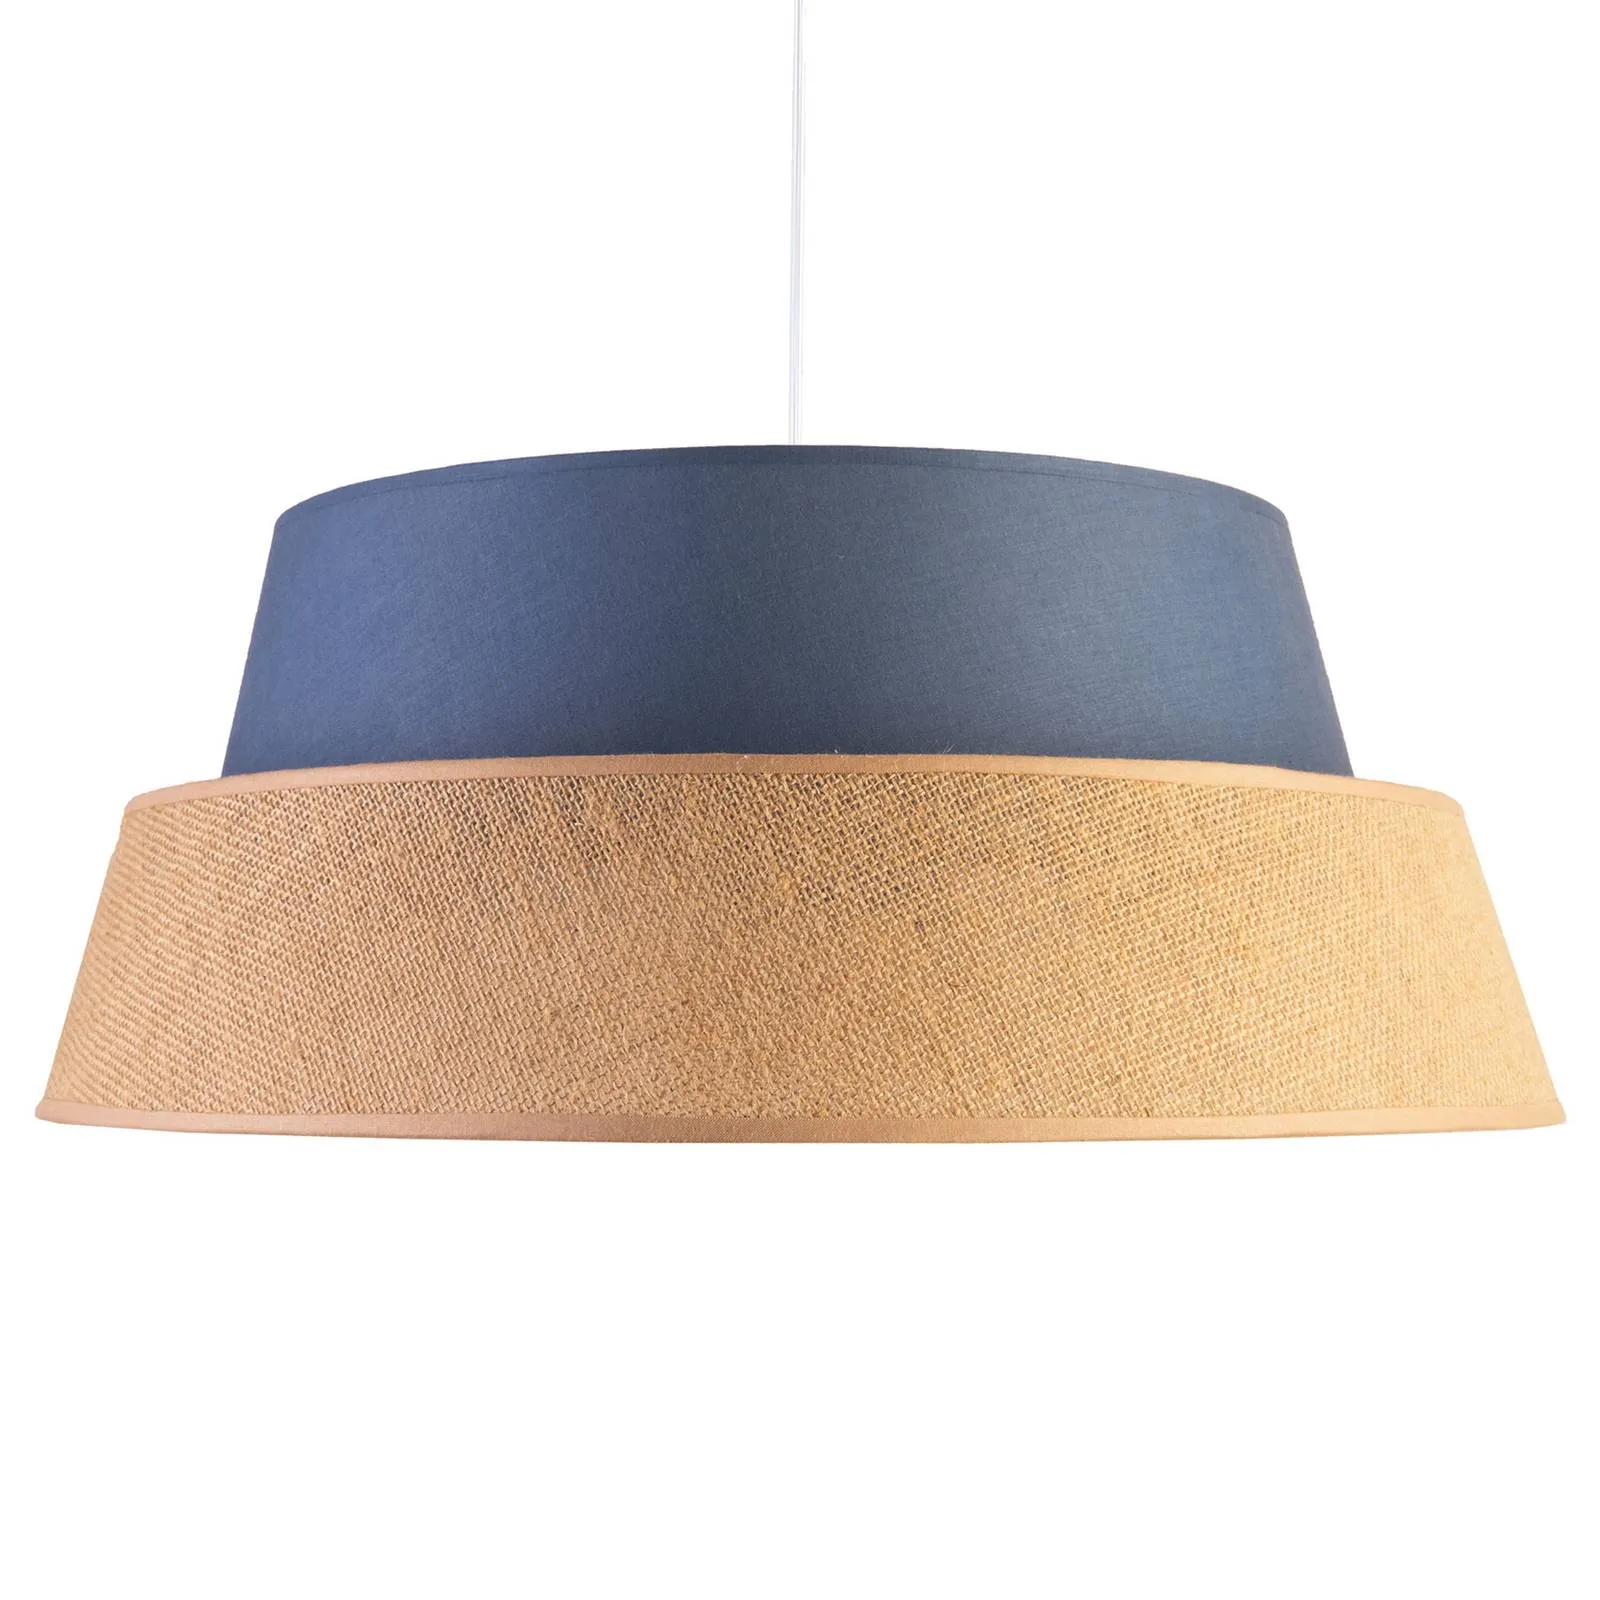 Galaxy Soft Nature hanging light, blue/brown